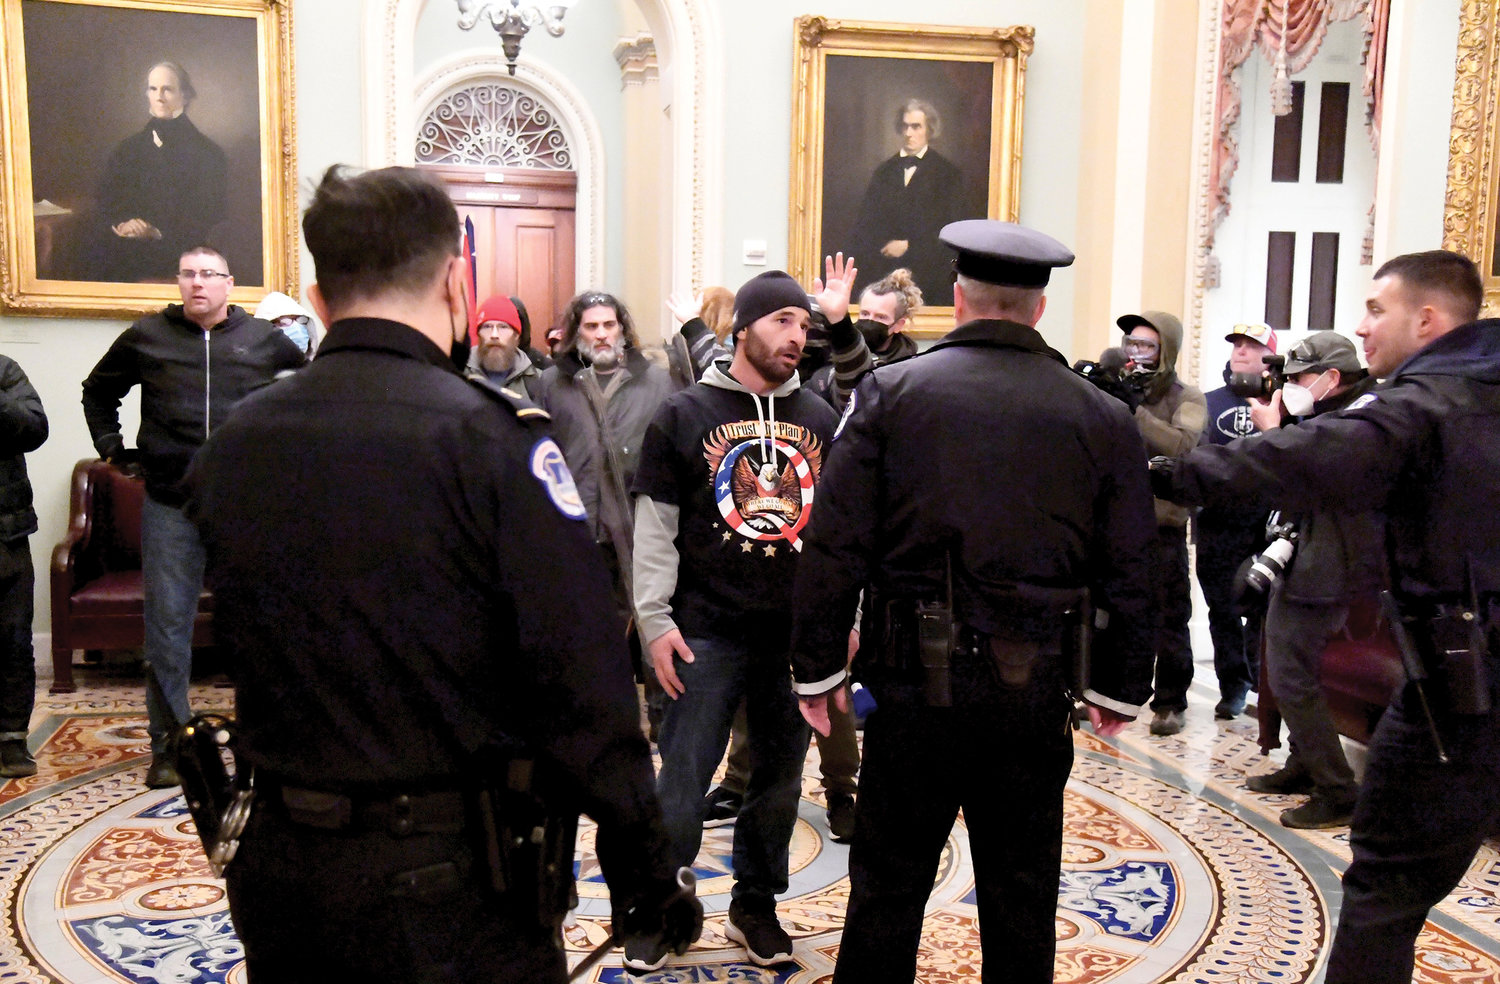 SIEGE ON CONGRESS—Police confront supporters of President Donald Trump as they demonstrate on the second floor of the U.S. Capitol building in Washington, D.C., near the entrance to the Senate after breaching security defenses Jan. 6.